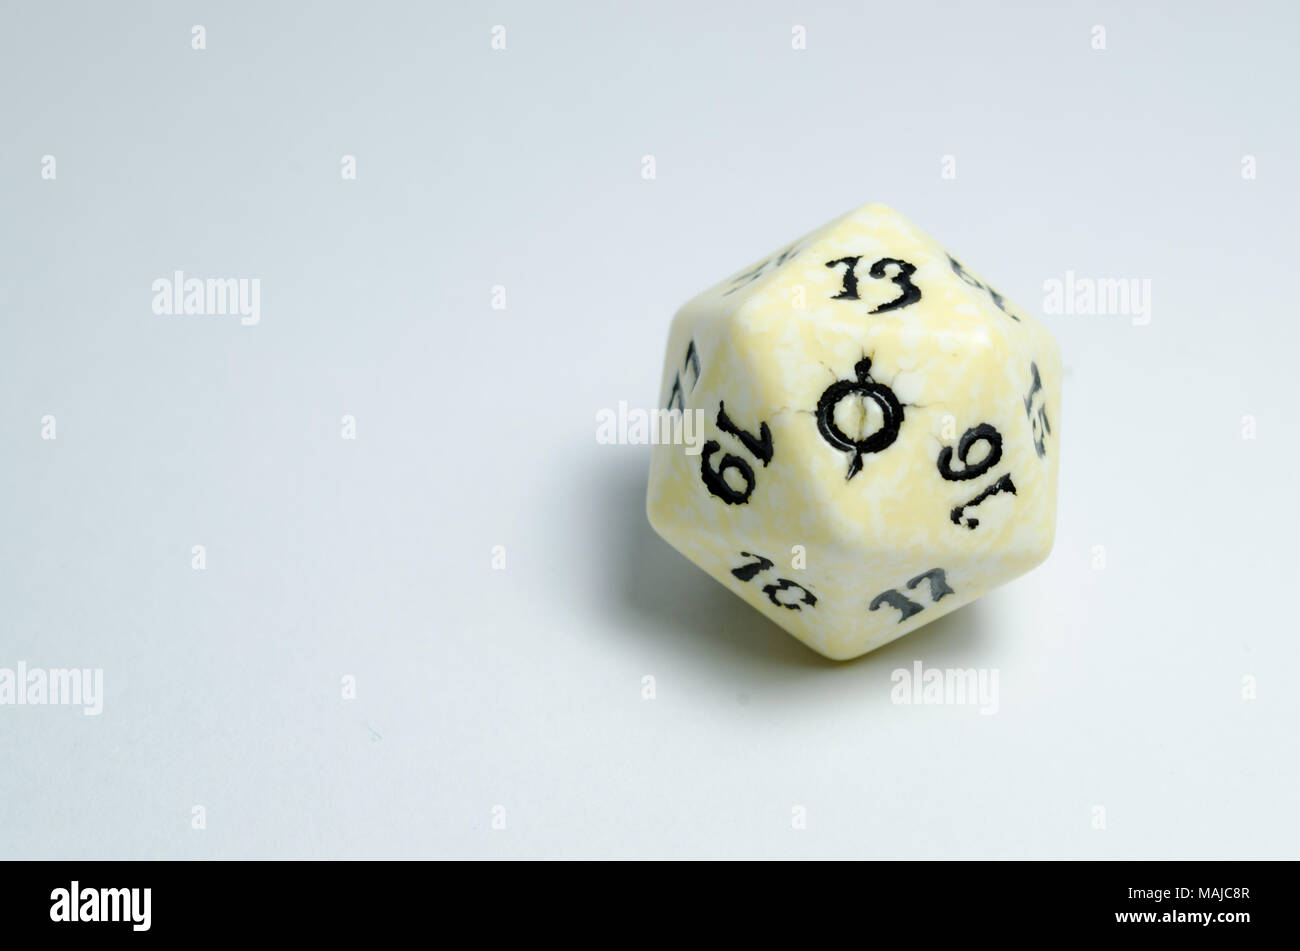 twenty-sided dice, isolated on a white background. symbol in focus. dice of role playing game Stock Photo